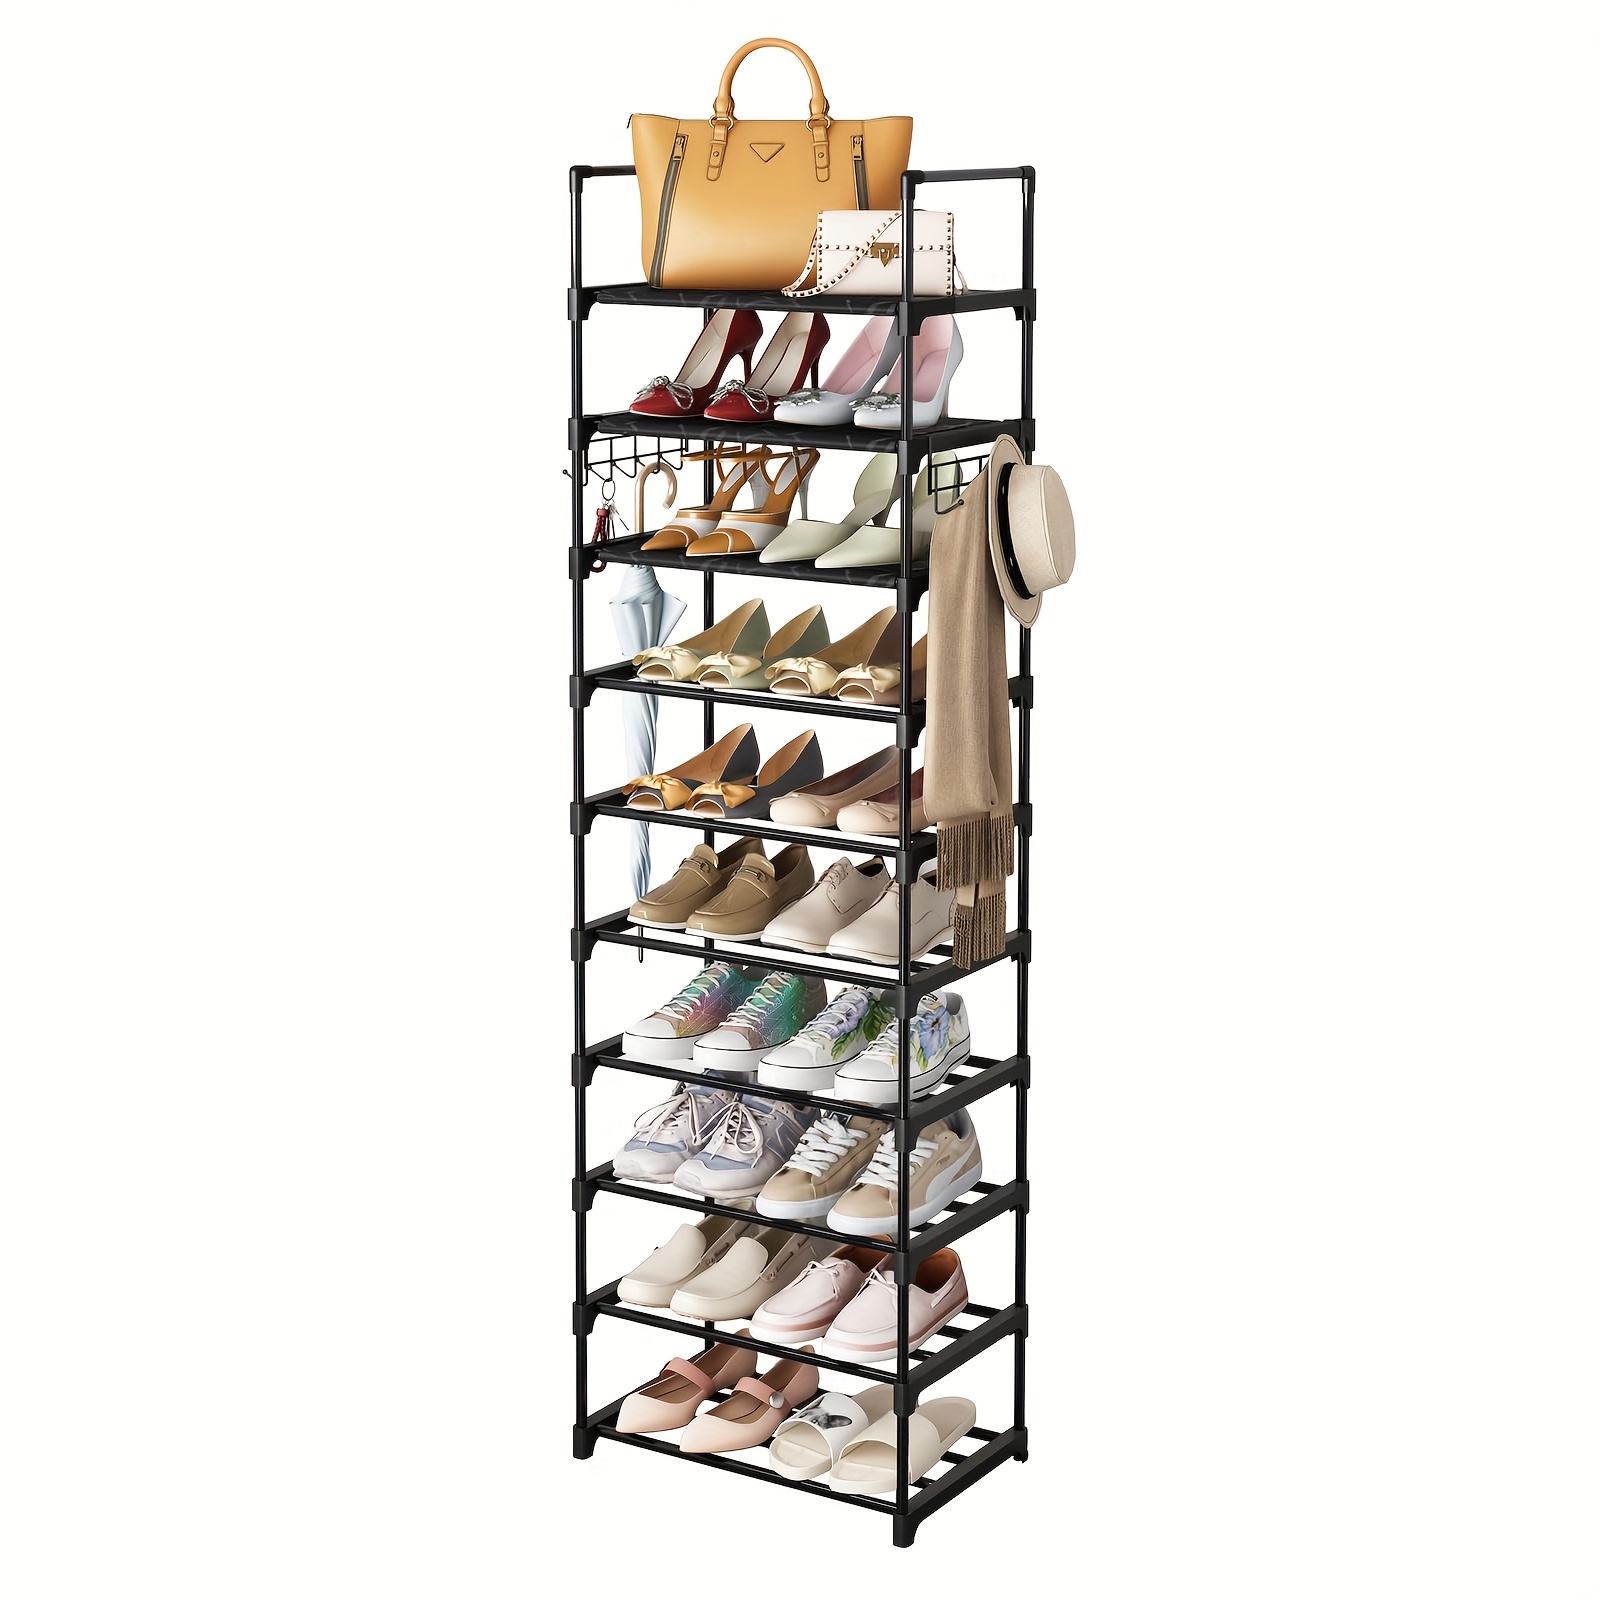 

10-tiers Shoe Rack For Cloest, Tall Shoe Organizer For Entryway Bedroom Hallway, Shoe Storage Large Capacity For 20-24 Pairs Of Shoes And Boots, Narrow Metal Shoe Shelf With Hooks (black), 78.7in